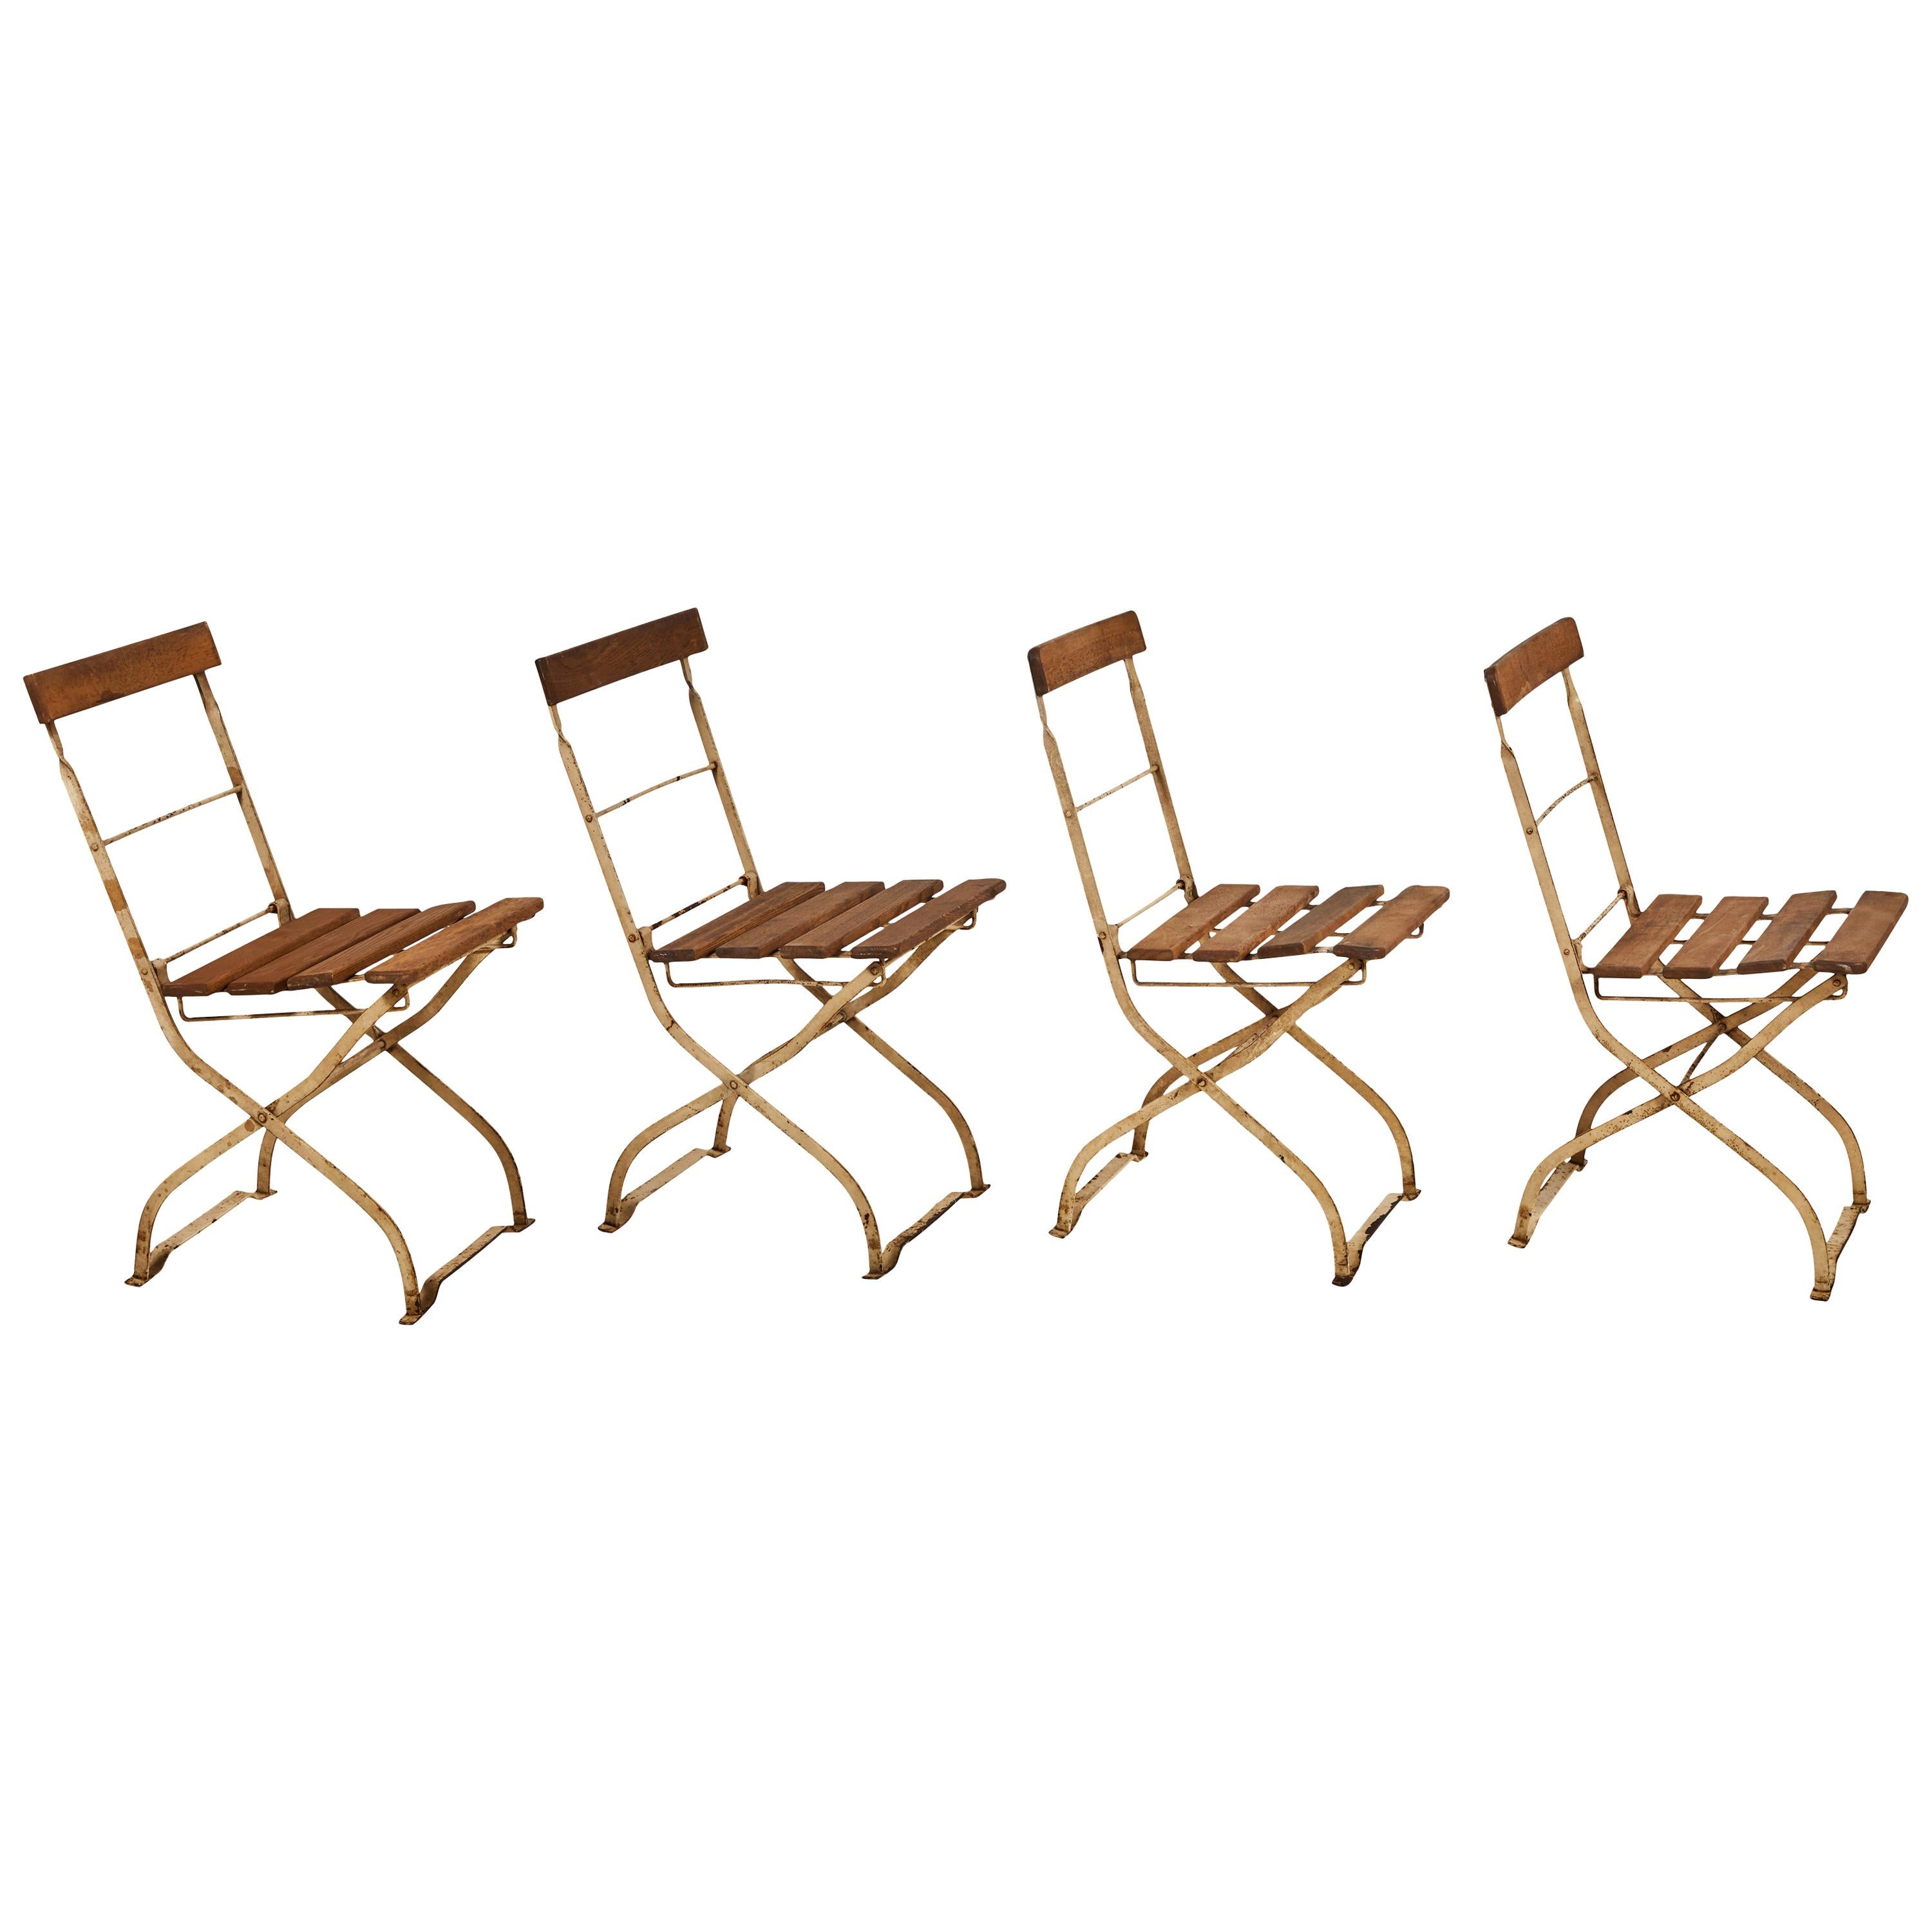 Set of Four Slatted Wood and Metal Folding Outdoor Garden Chairs